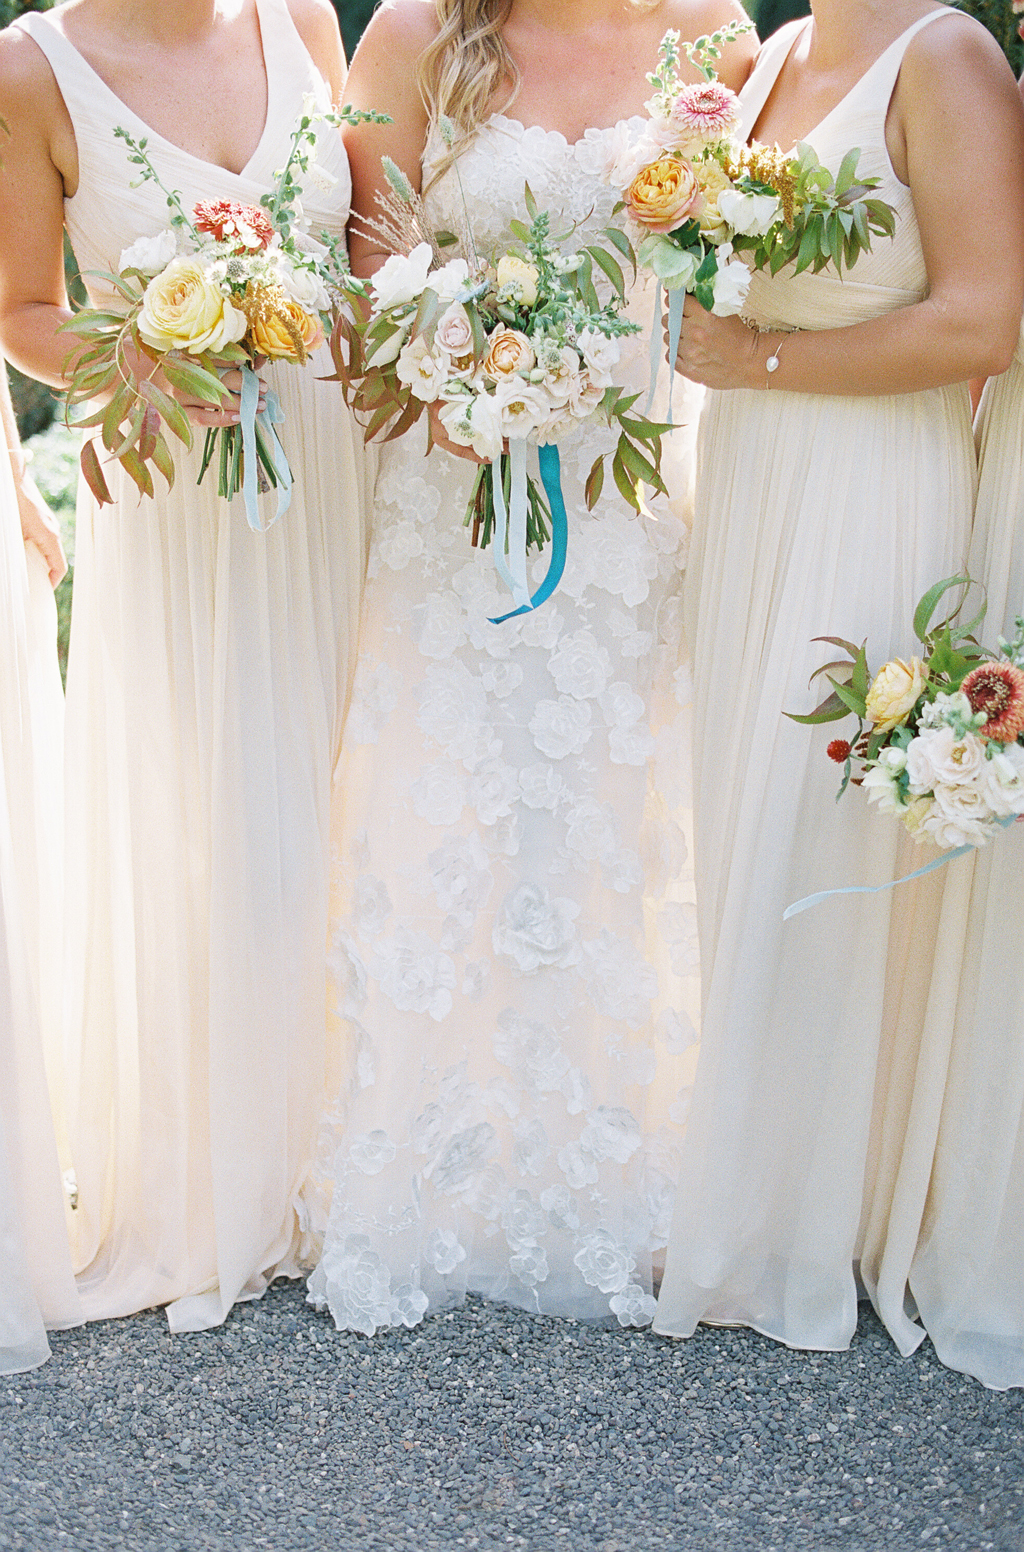 detail of bridesmaids dresses and bouquets at a napa wedding at the venue beaulieu gardens